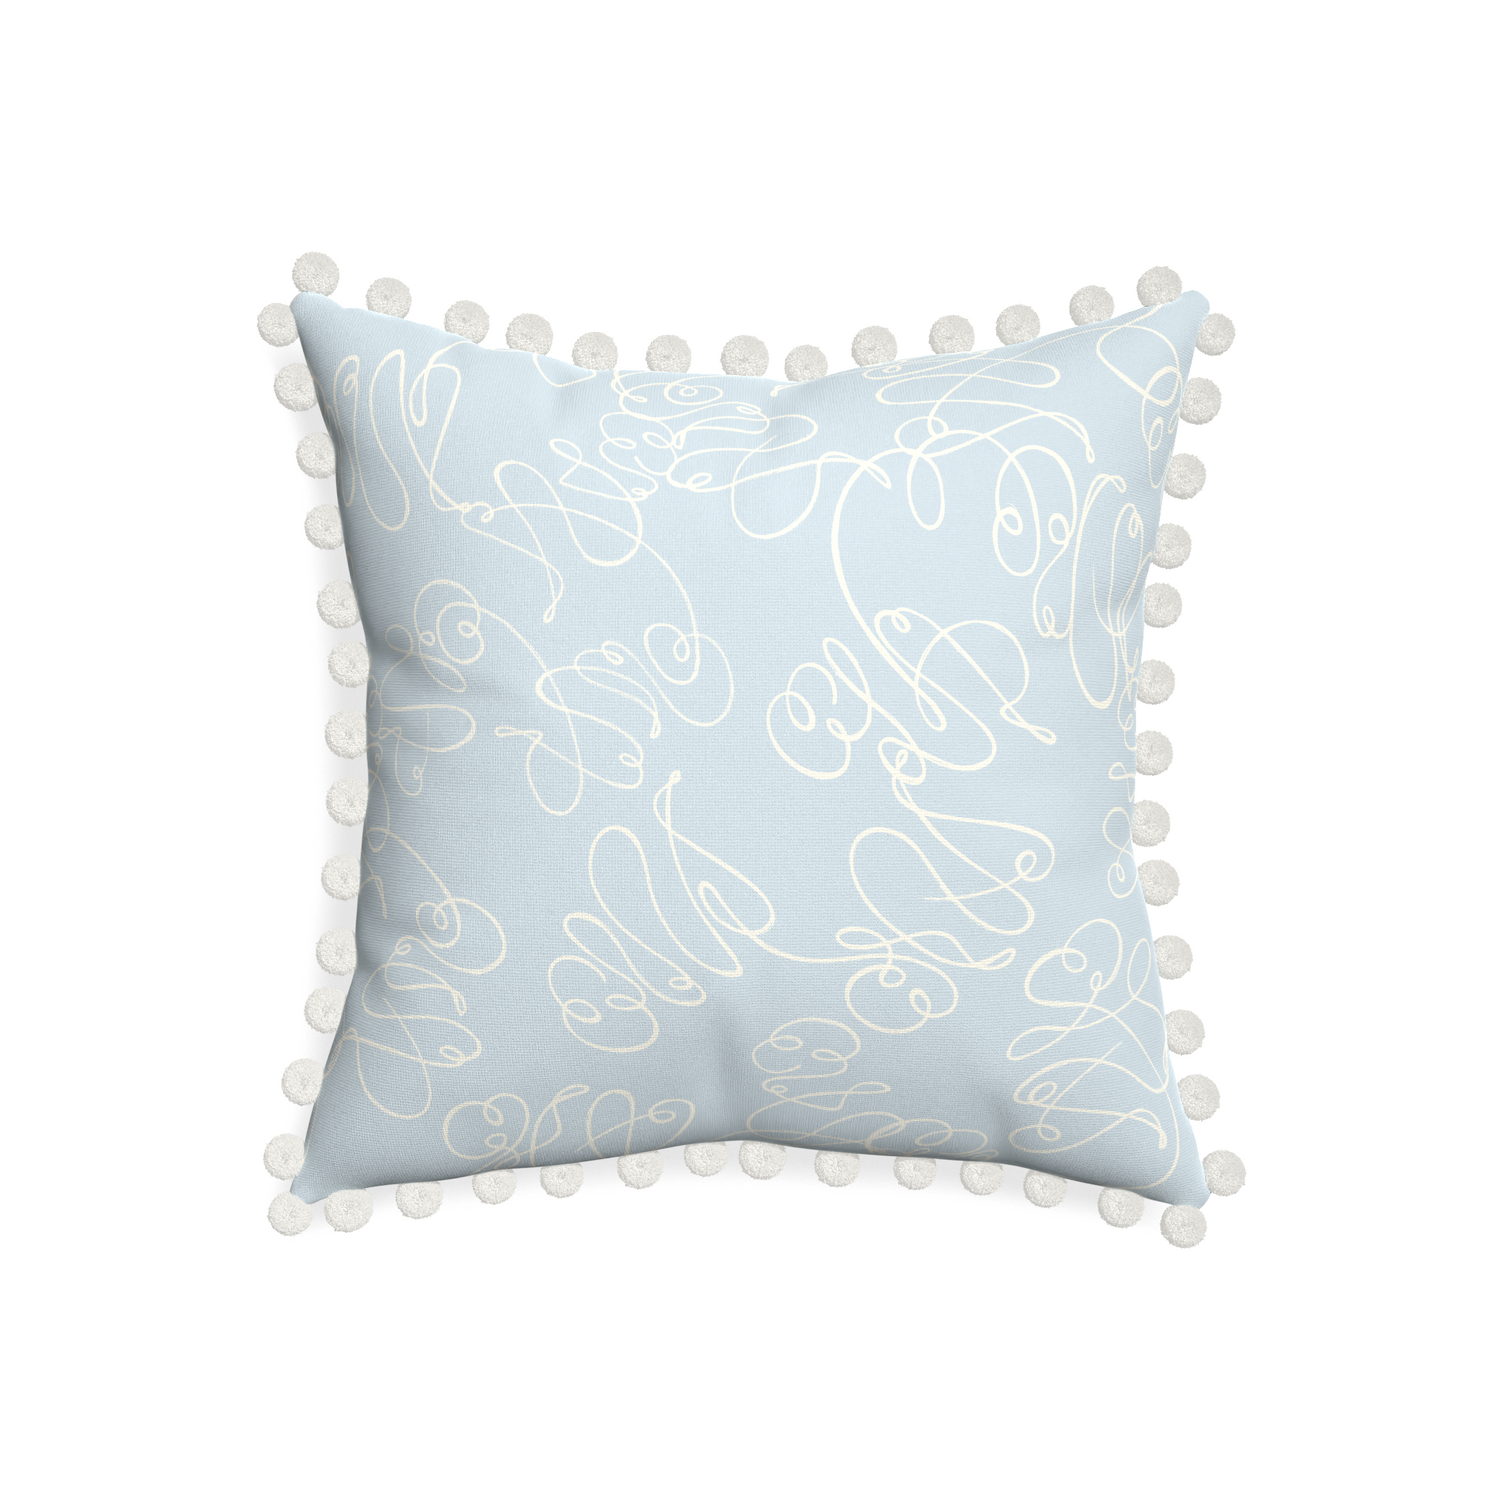 20-square mirabella custom pillow with snow pom pom on white background